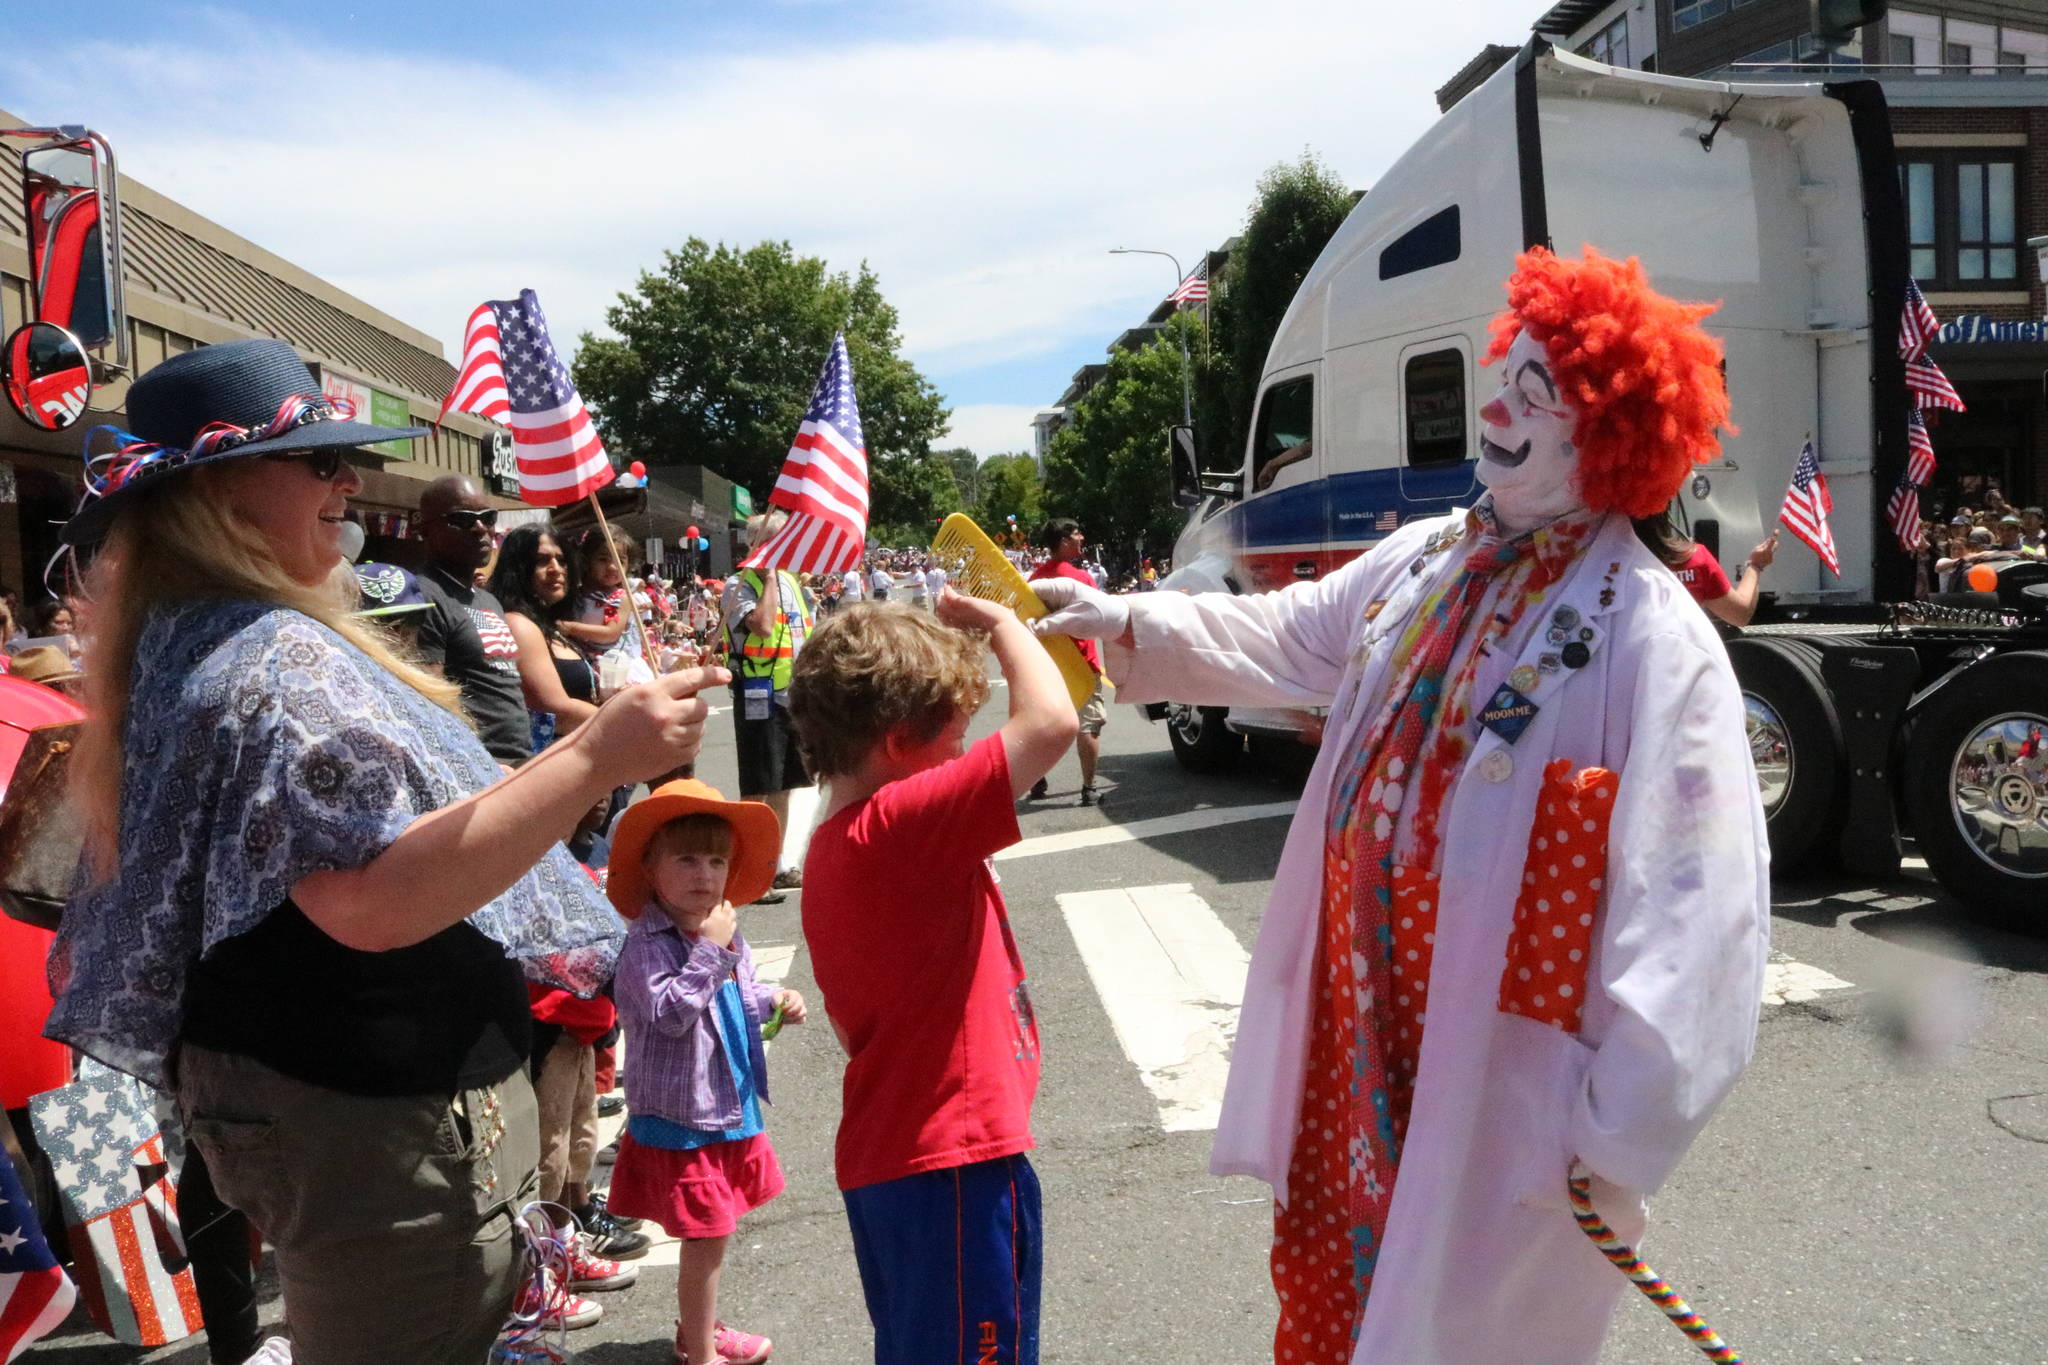 Celebrate Kirkland event brings thousands to downtown